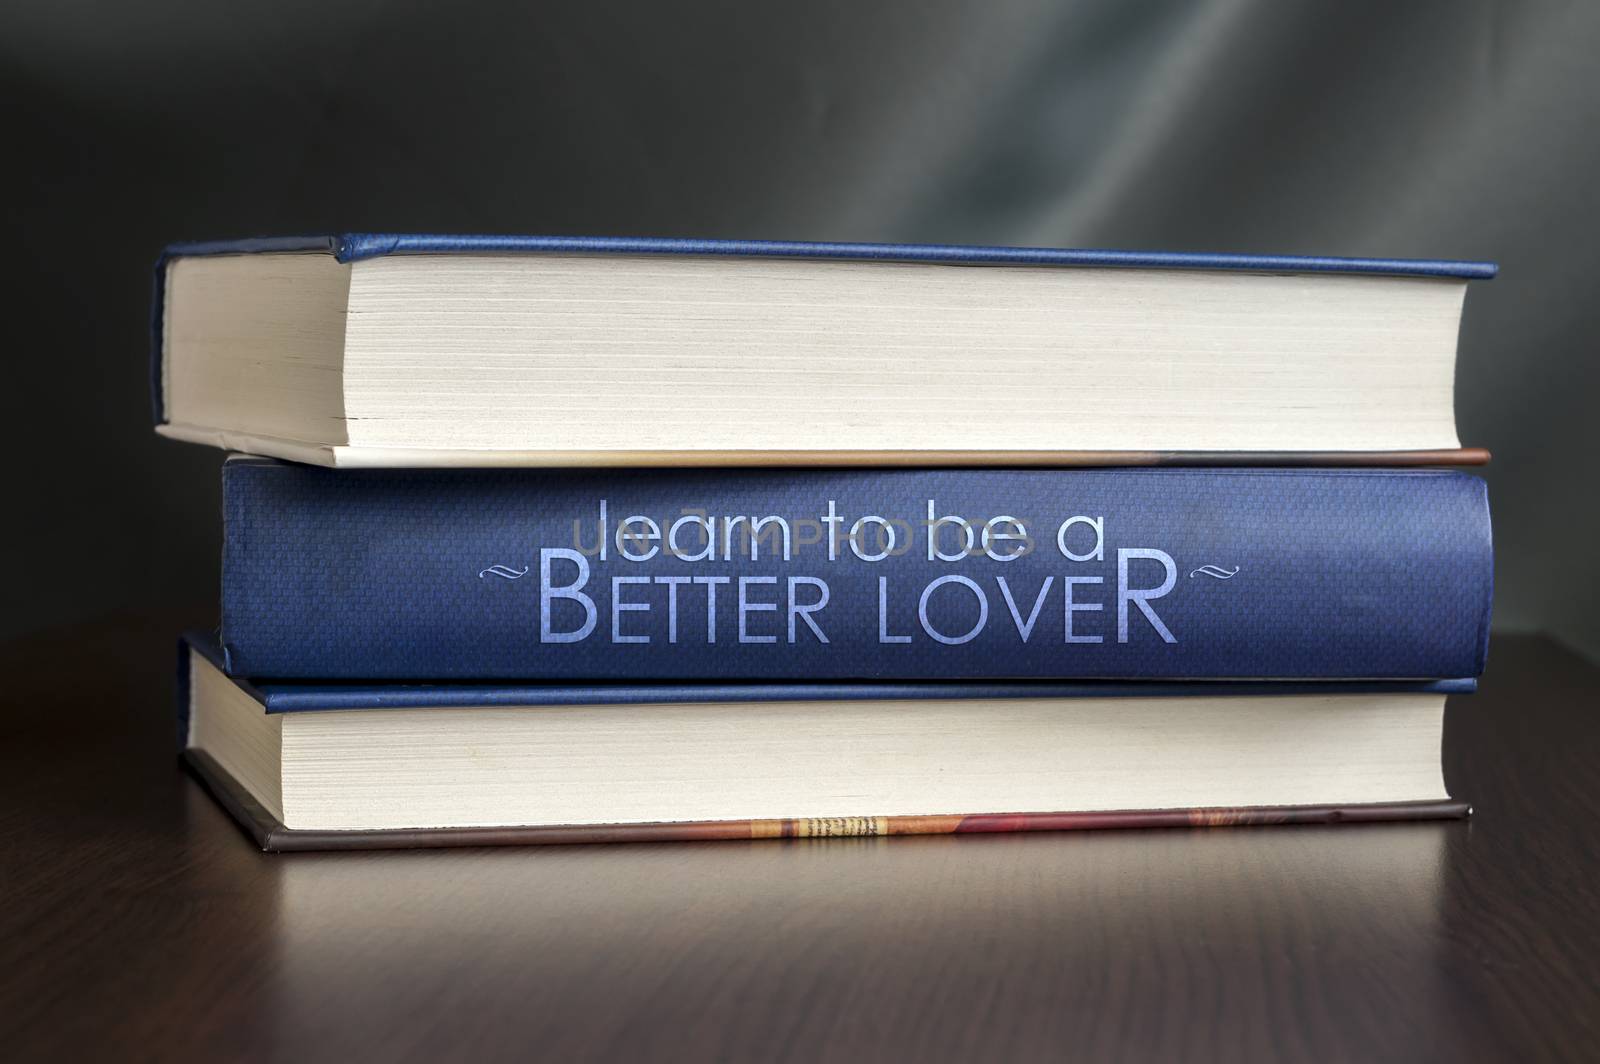 Books on a table and one with "Learn to be a better lover" cover. Book concept.